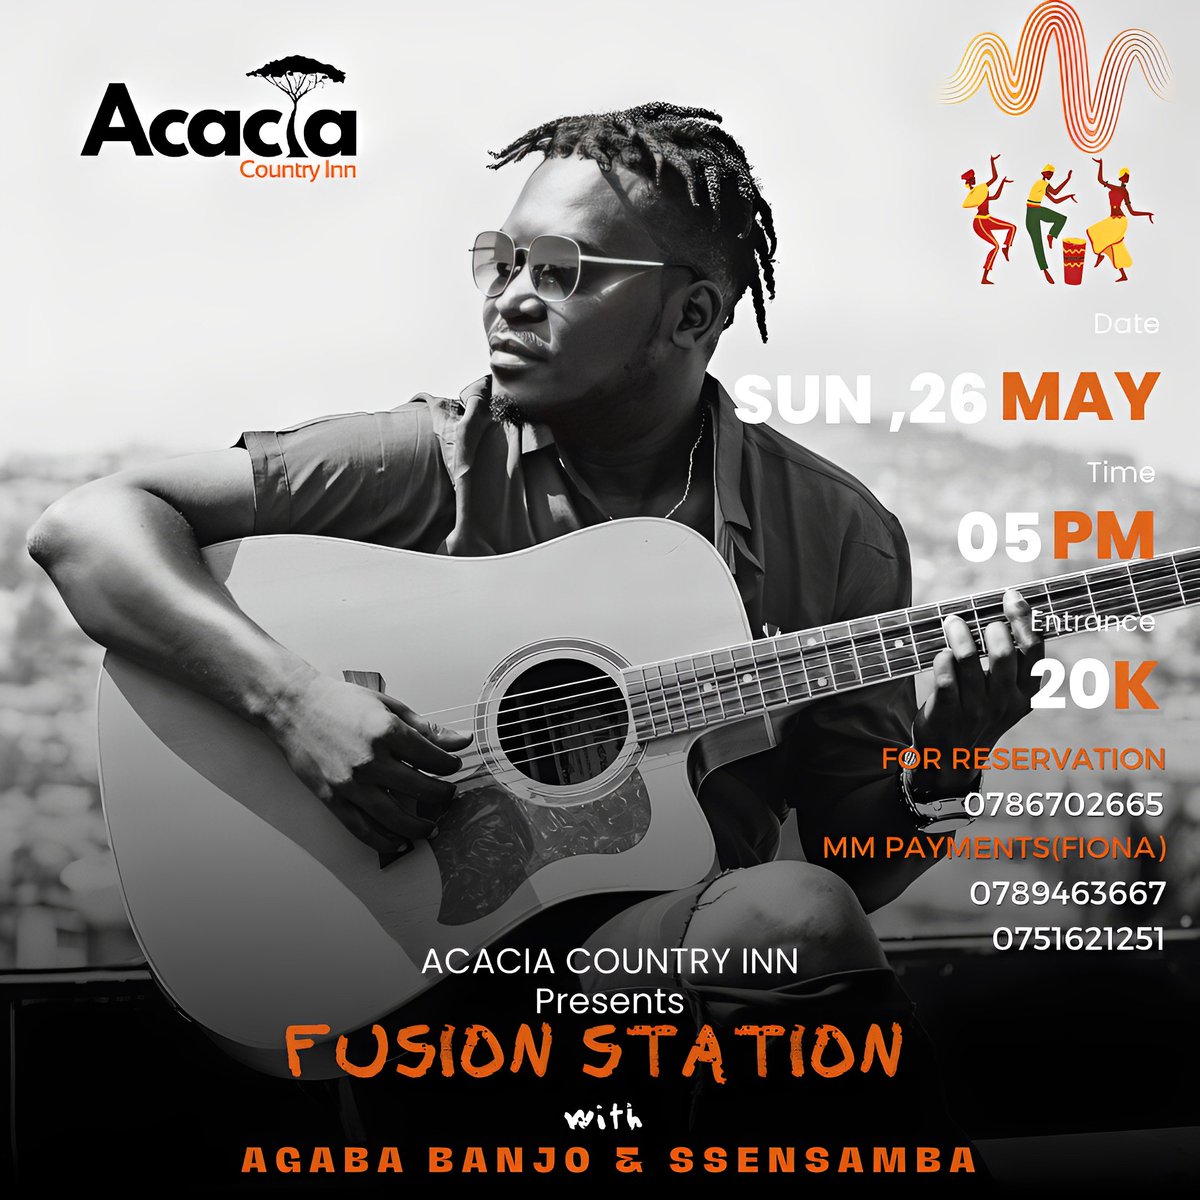 Everywhere I see big nyash, I remember my brother @DeejayBrizo 🤣🤣🤣😹😹 Anyways, I digress but don't forget #FusionStation happening on the 26th at @countryinnmbra With @AgabaBanjo and @SSENSAMBA_ Tickets go for 20k only. Be there.